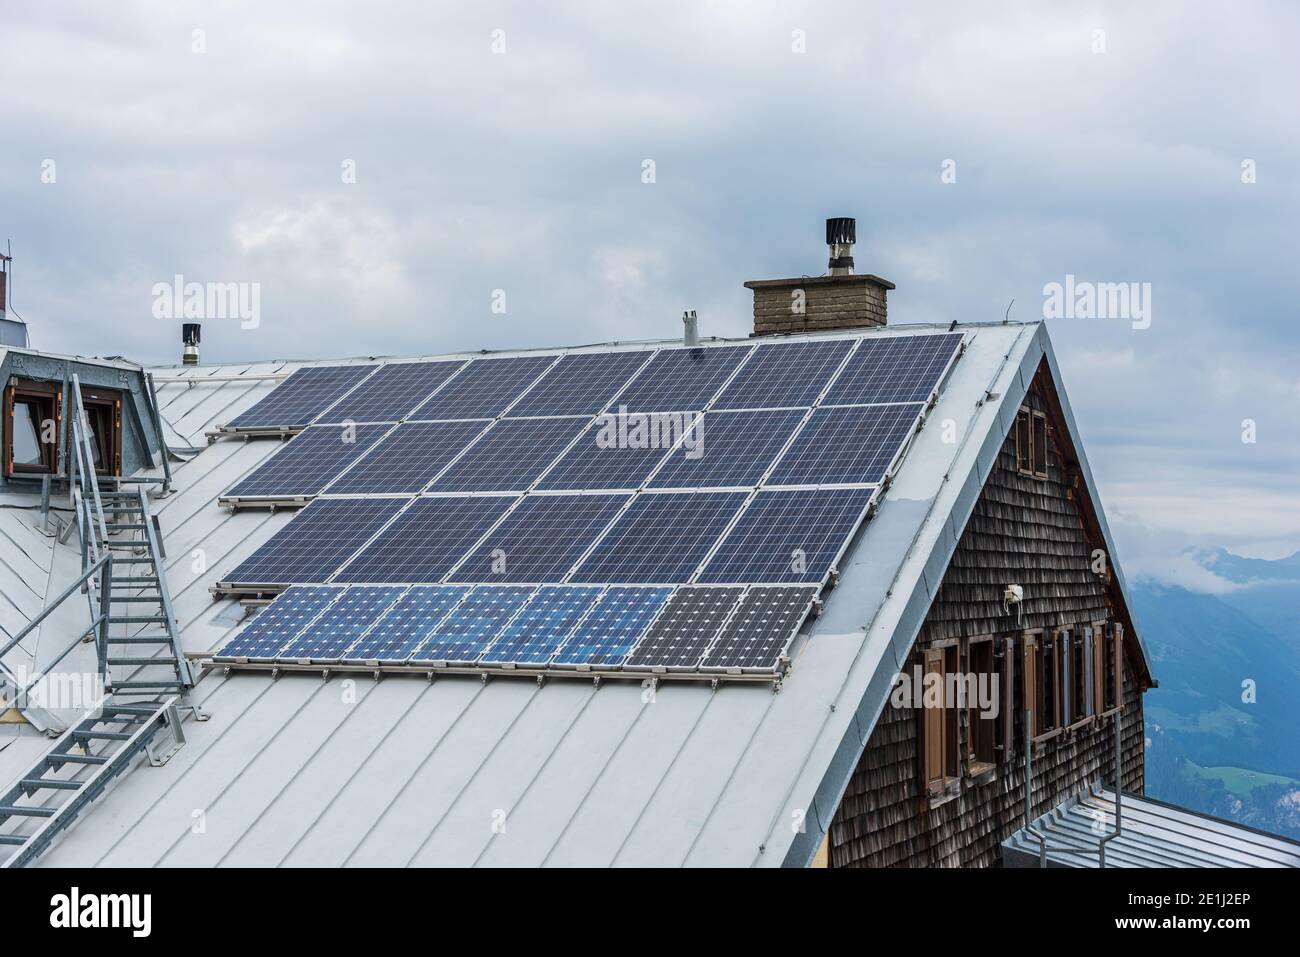 Solar photovoltaic panels PV on a house roof. Electricity from the sun during winter. House with windows and chimney, mountains at the background. Stock Photo